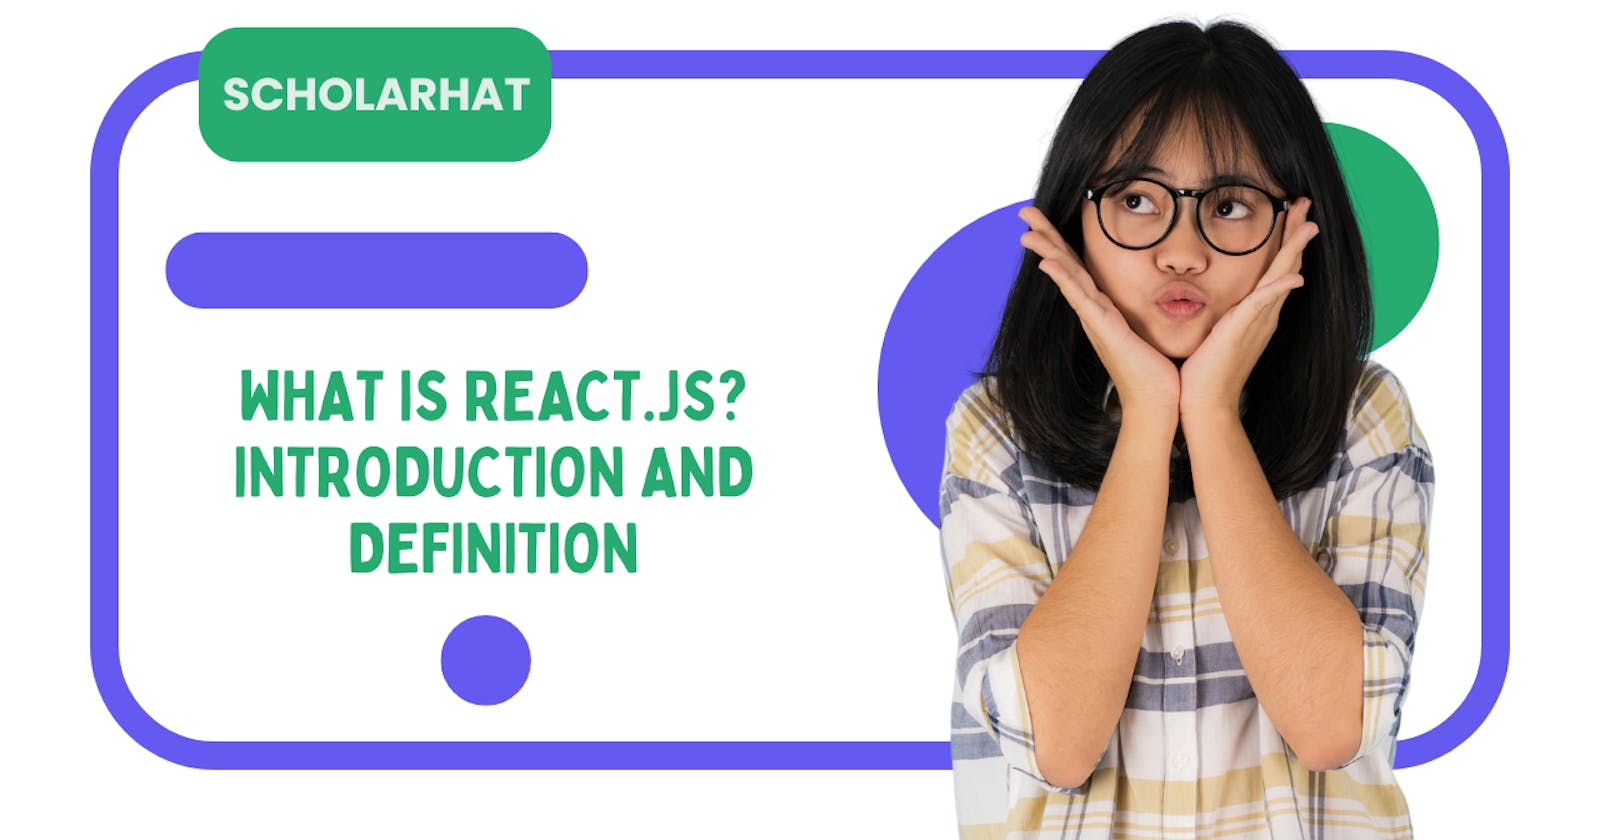 What is React.js? Introduction and Definition